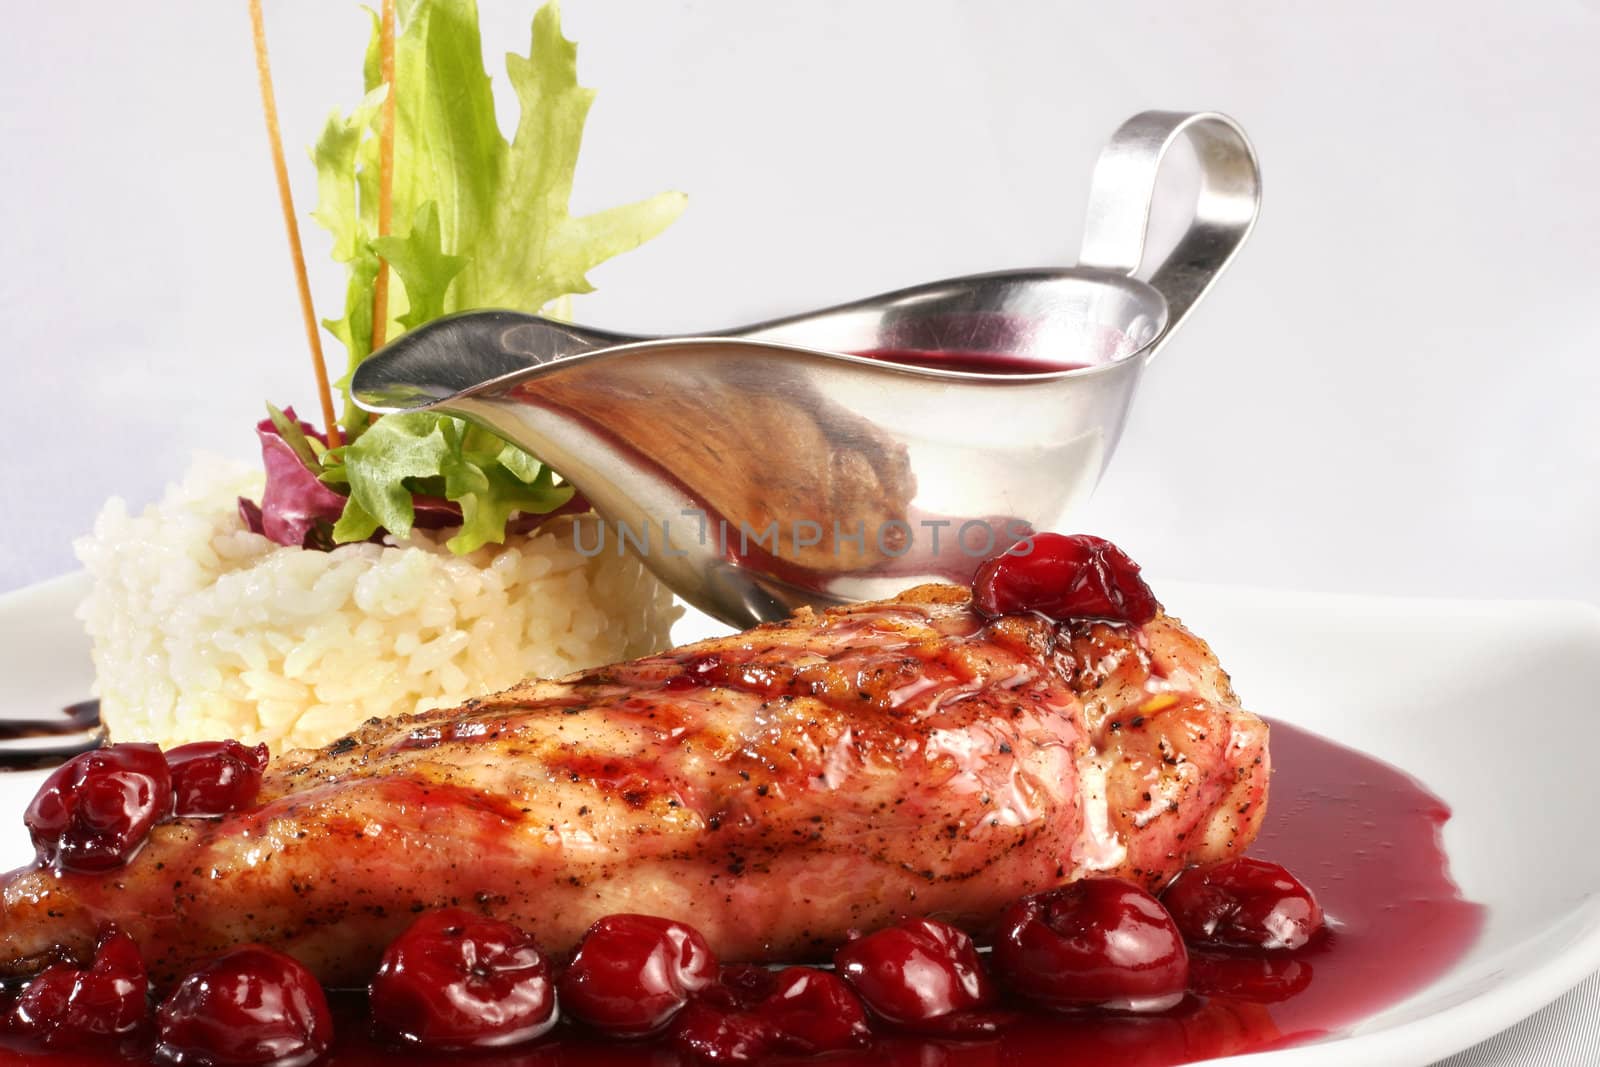 Chicken grill with rice and cherry sauce by igor_stramyk